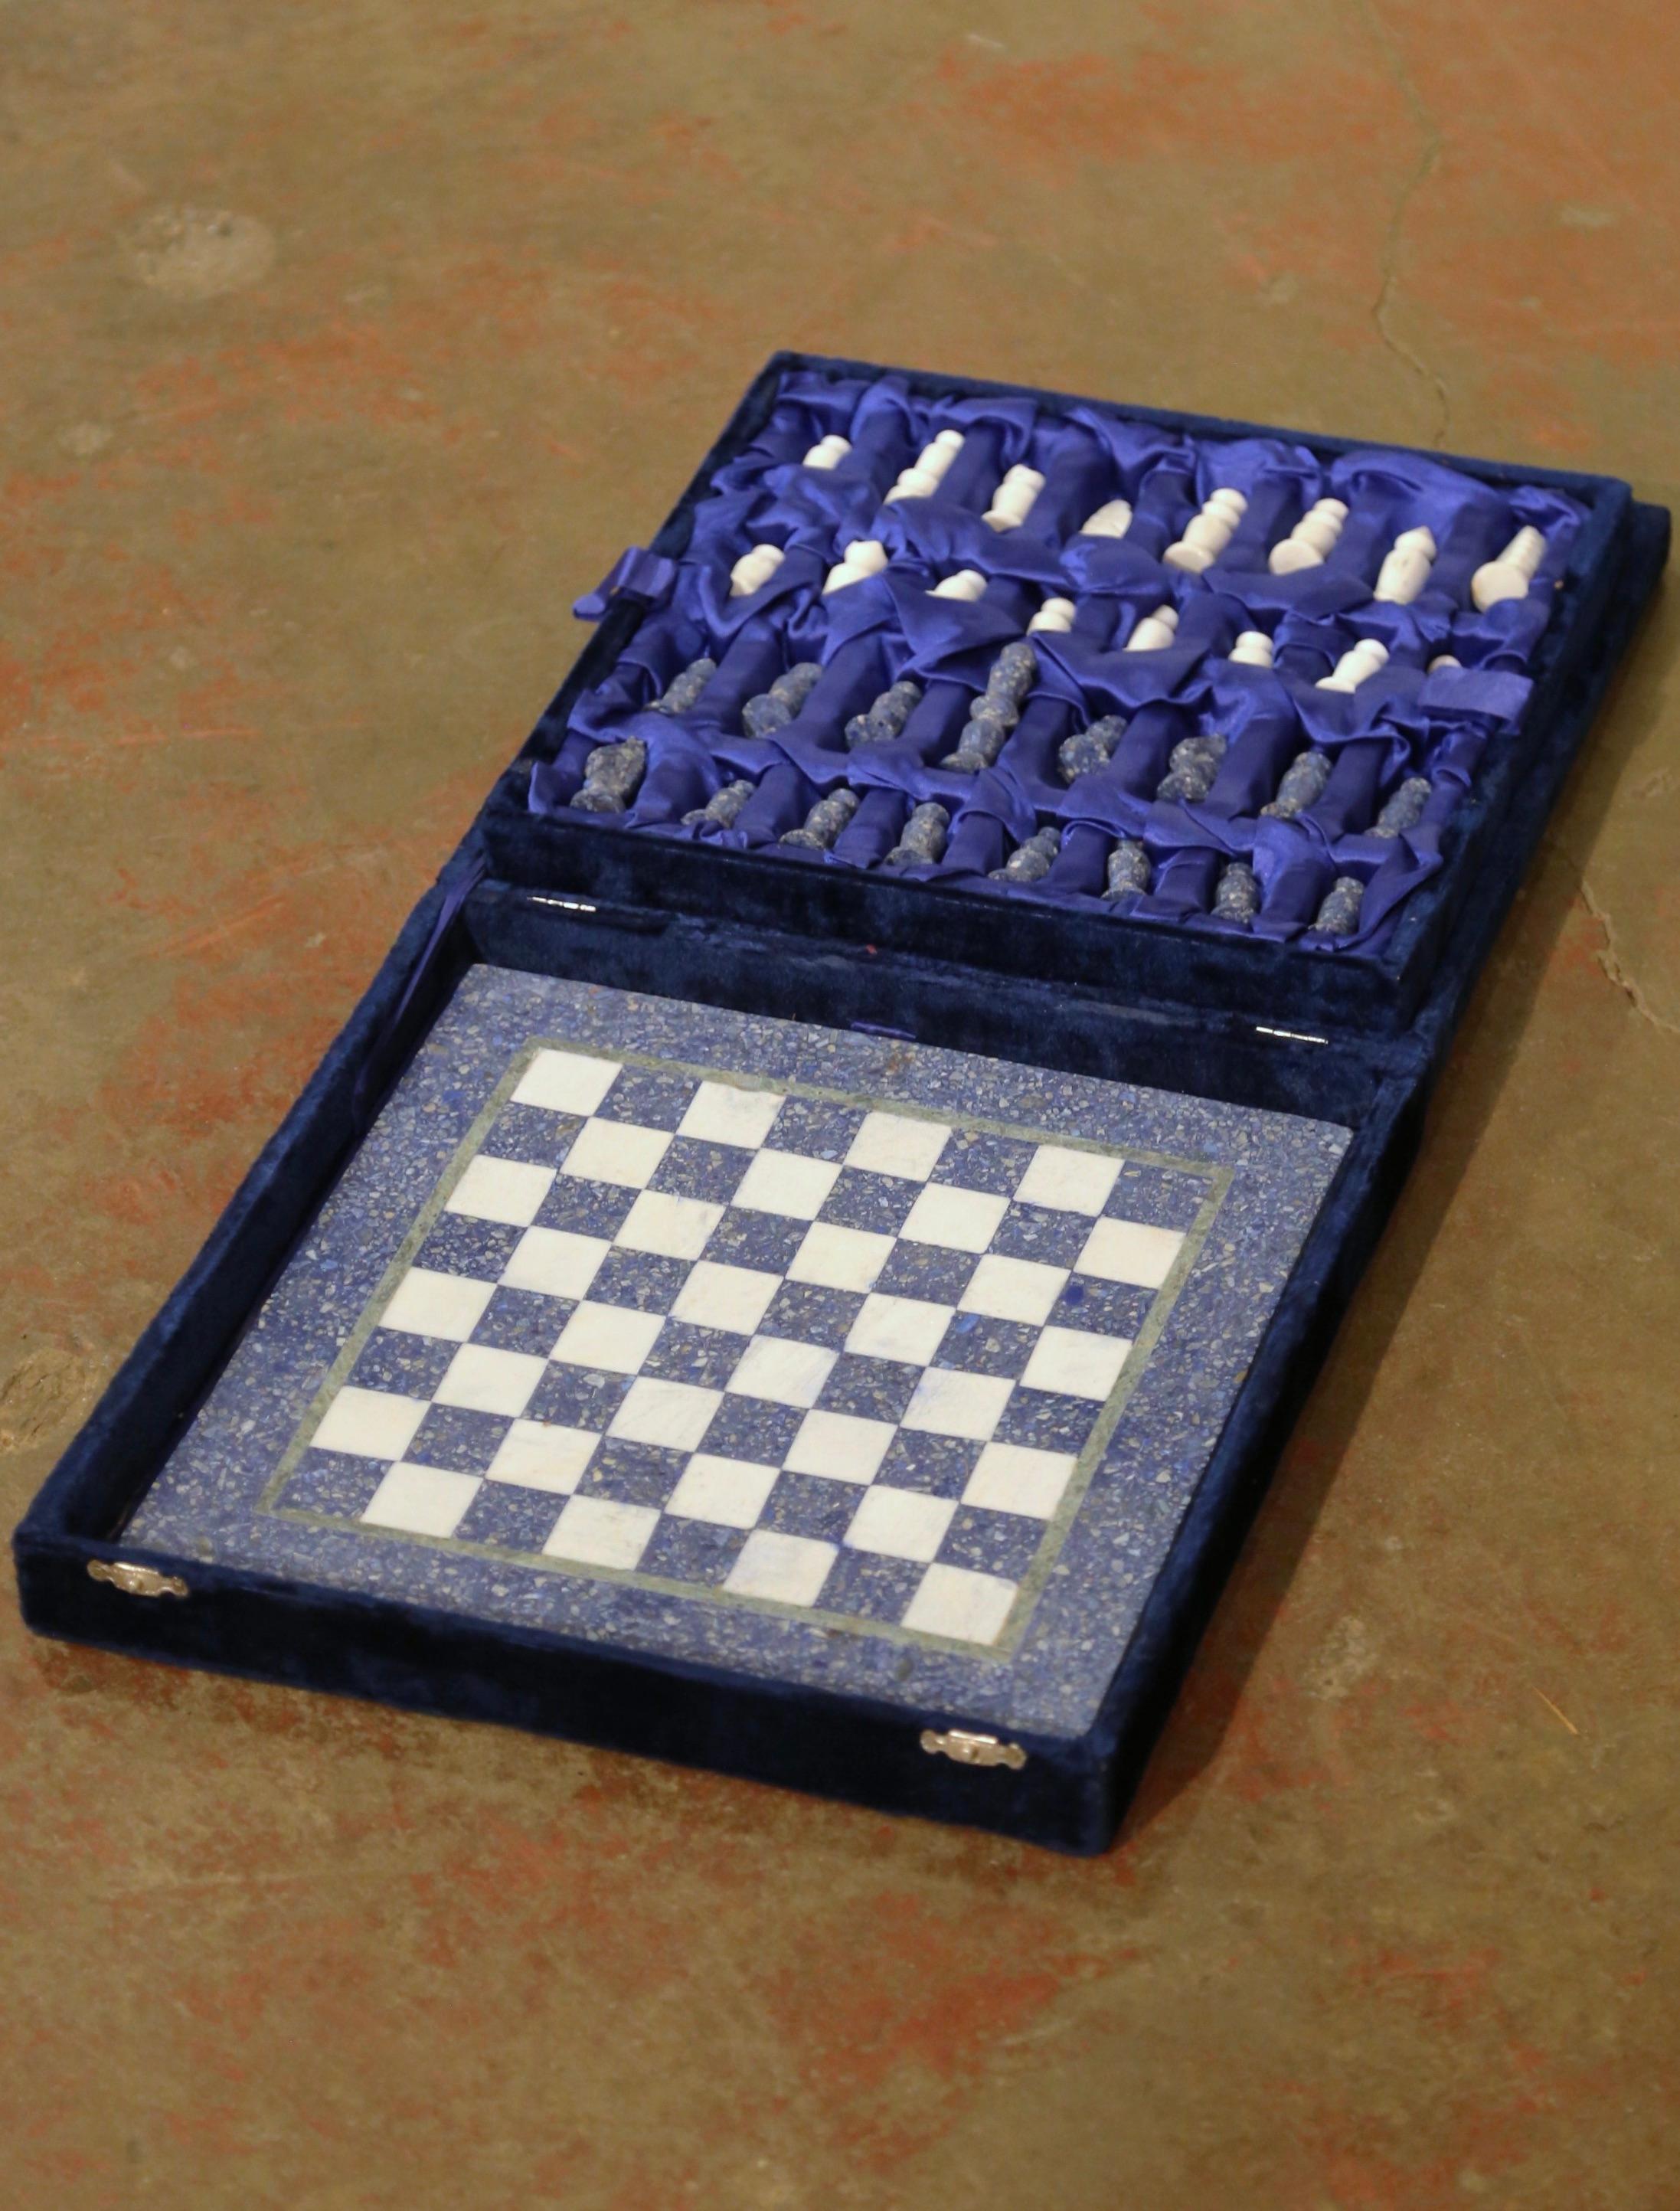 This complete set is skillfully handcrafted, featuring a heavy chess board in blue and white checkers with an olive green rim and thirty-two stone figurine pieces. Half of these pieces are a beautiful conglomerate blue, while the other half is a